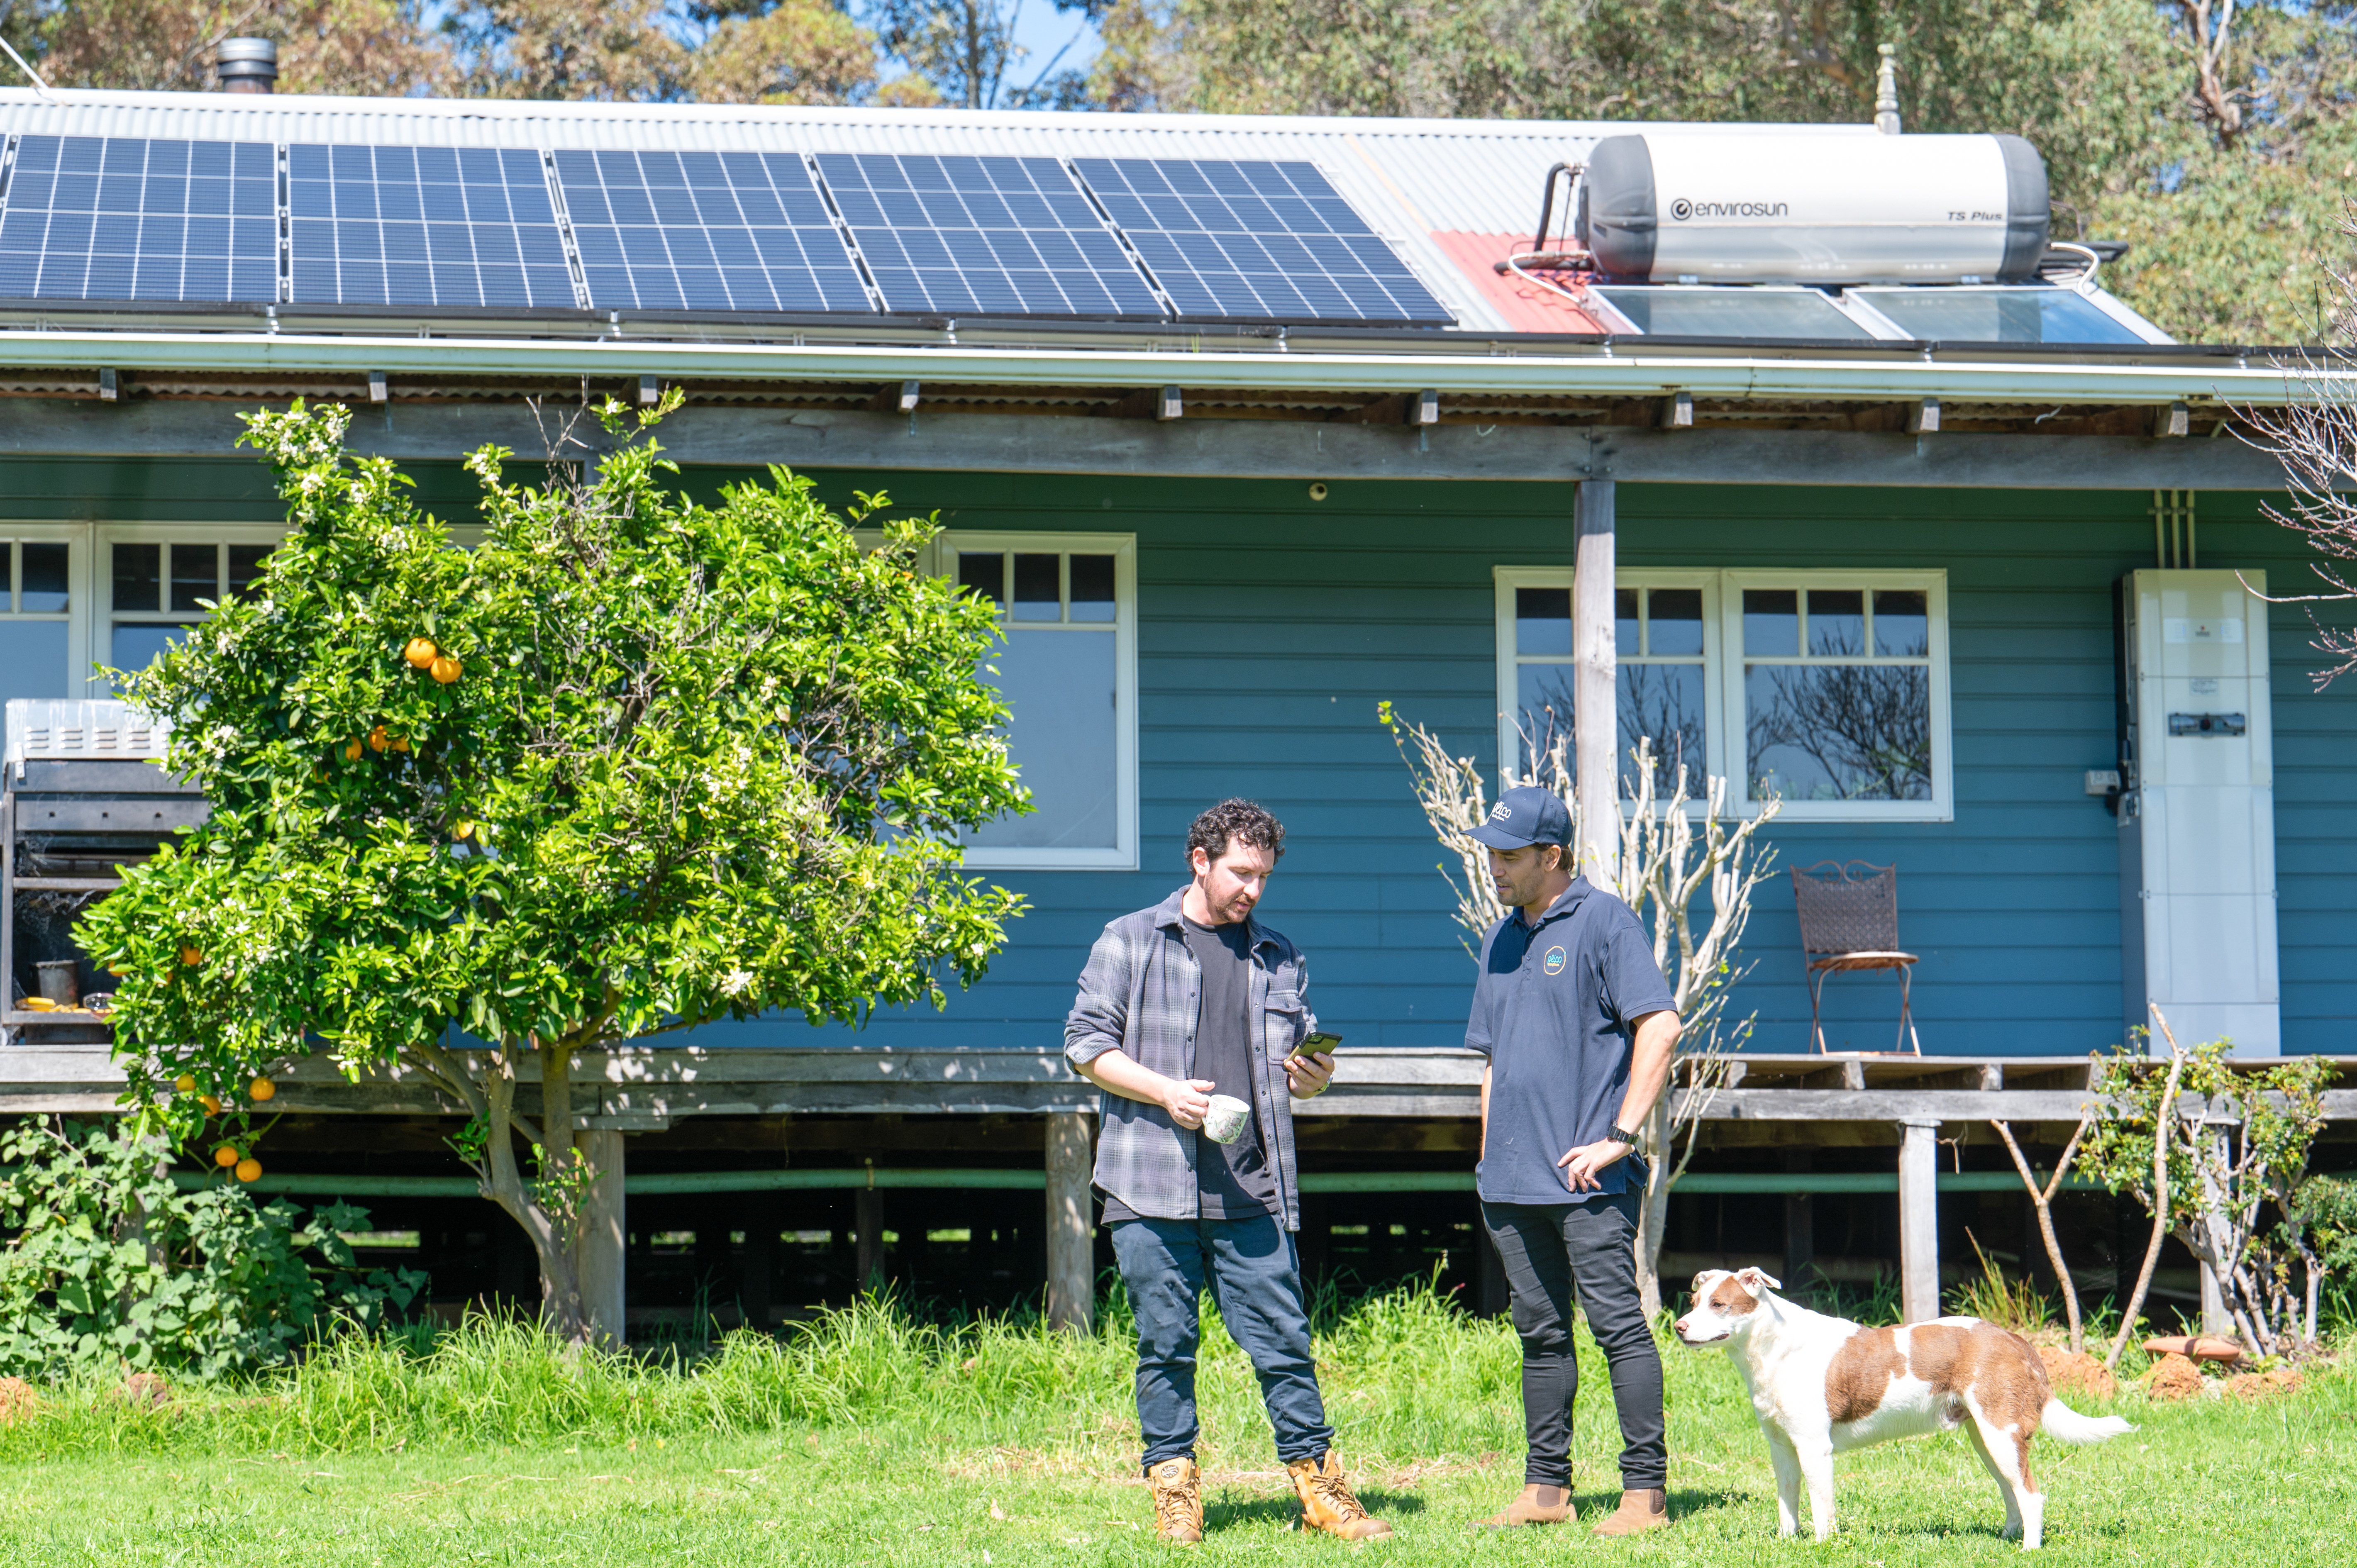 Two men standing in front of a house with a solar panel array on the roof